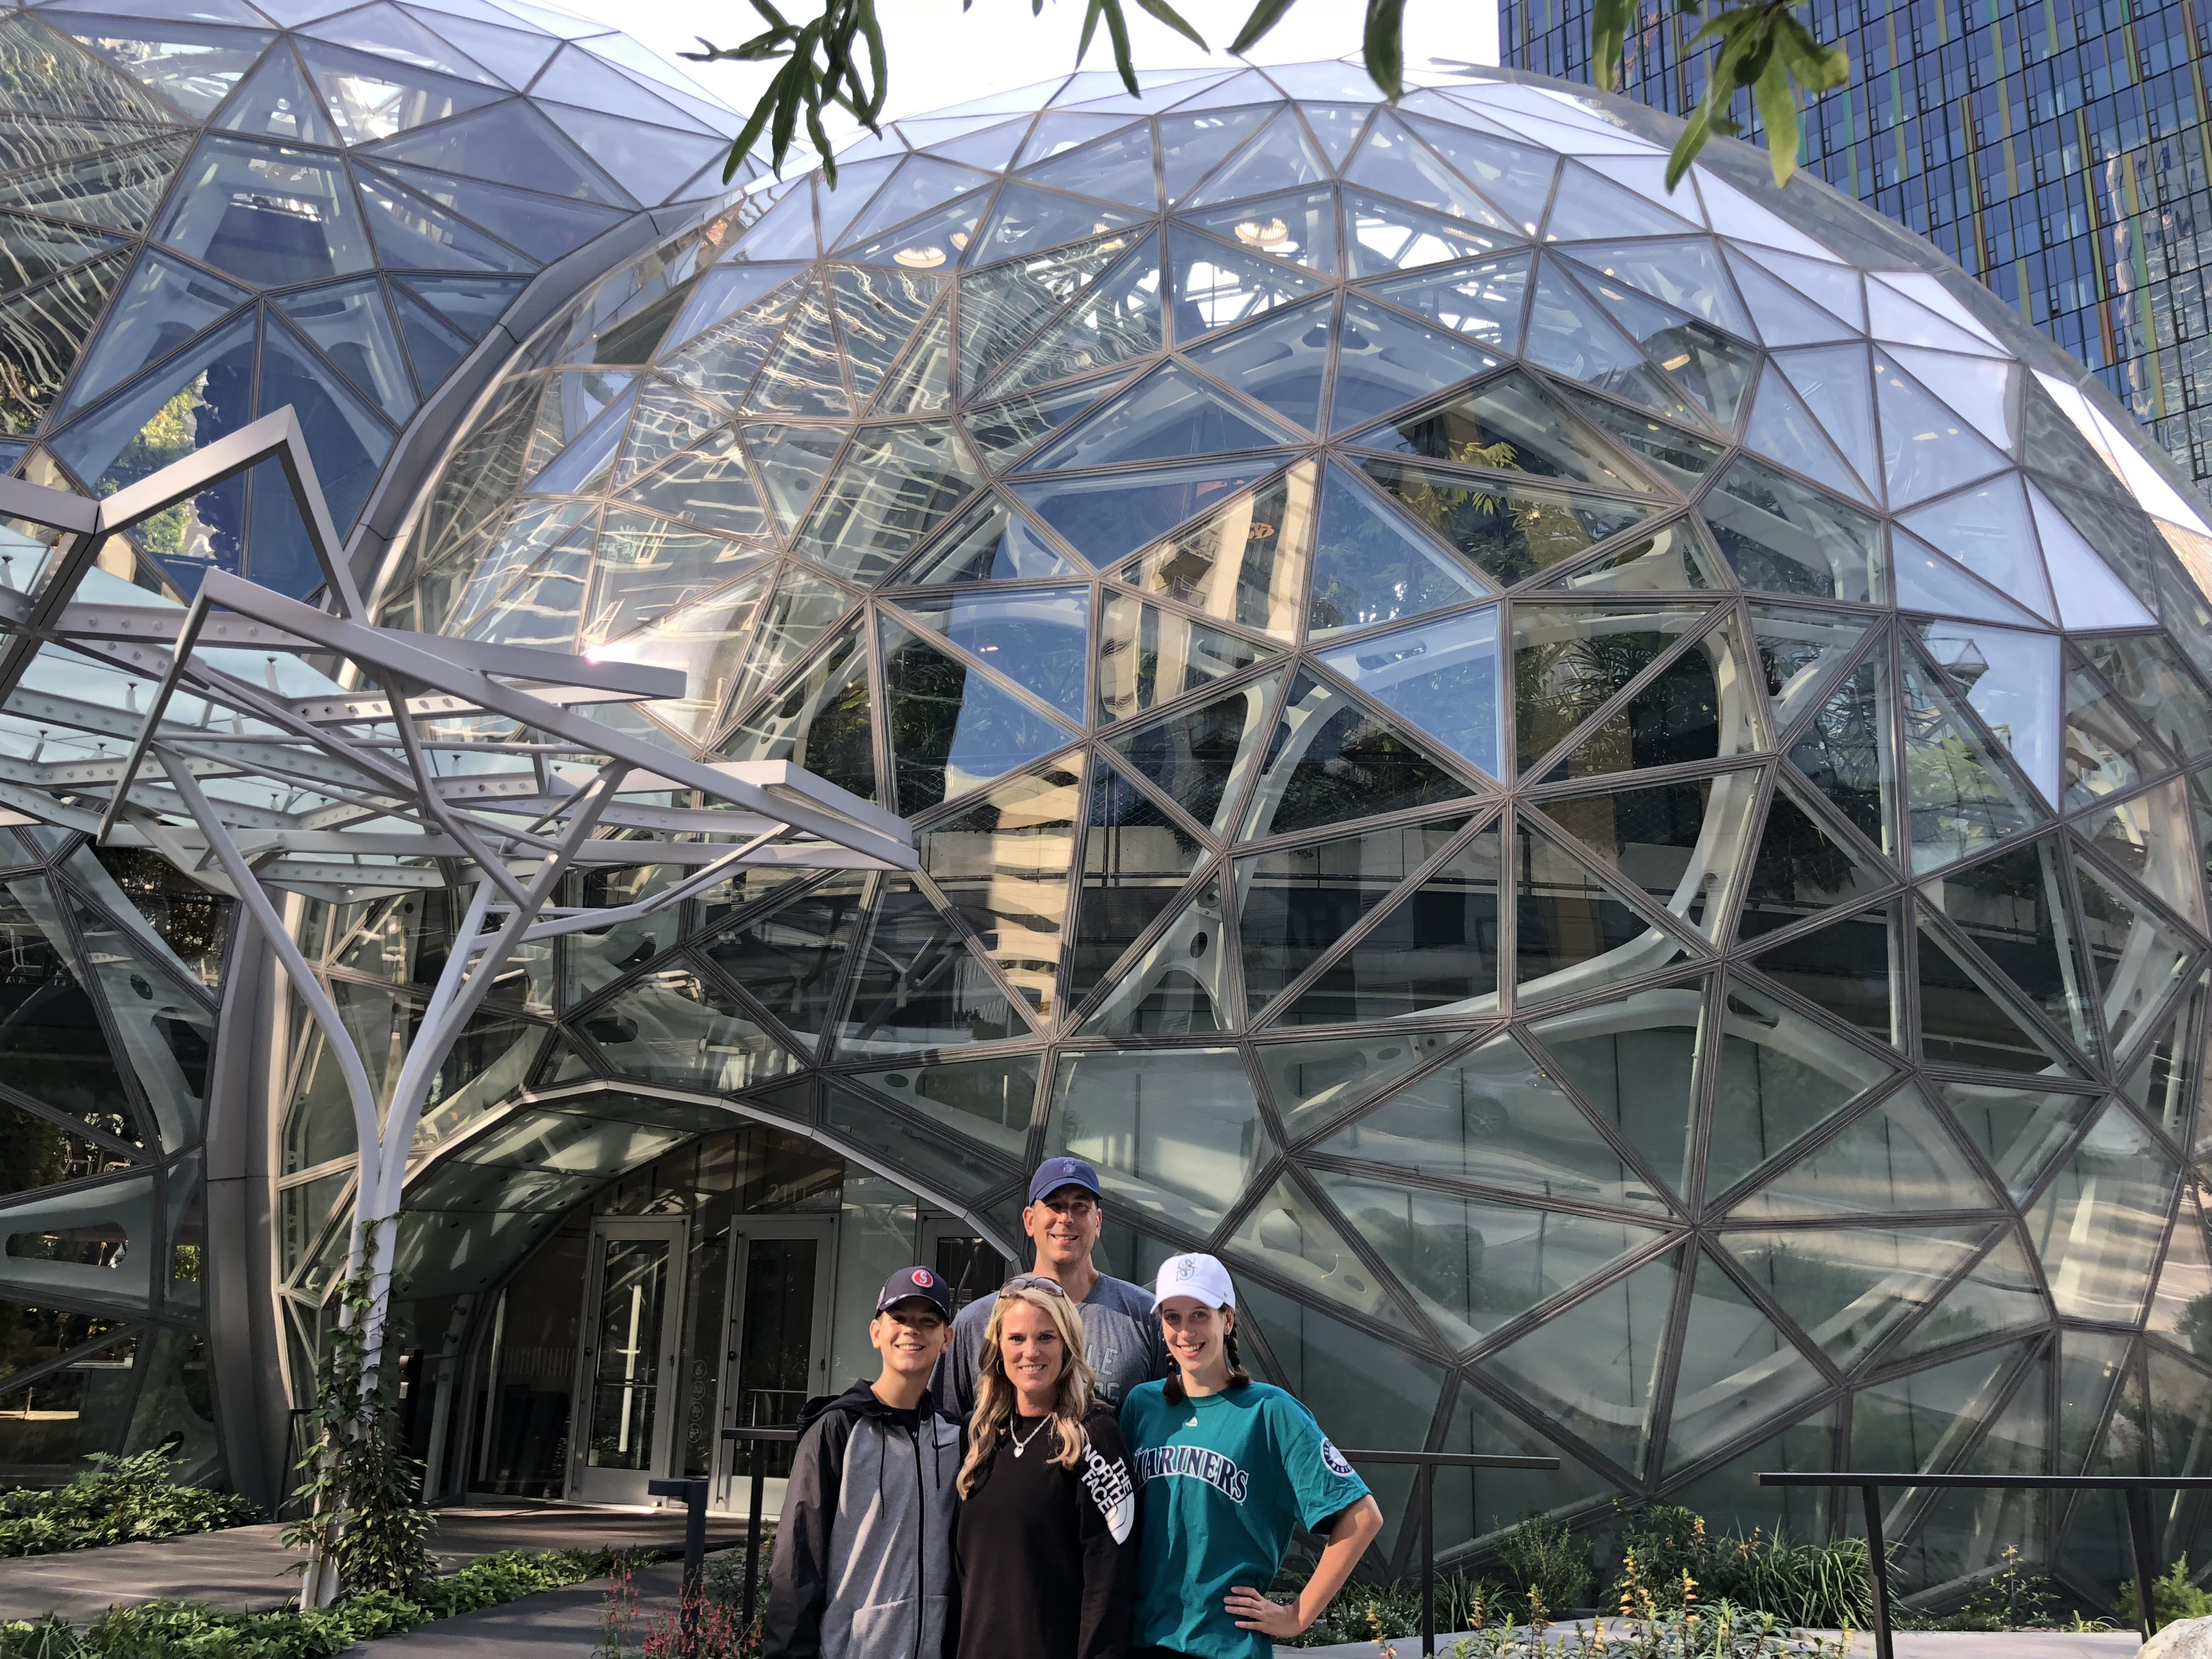 "The Spheres" Curved Steel Roof Structure in Seattle, WA.